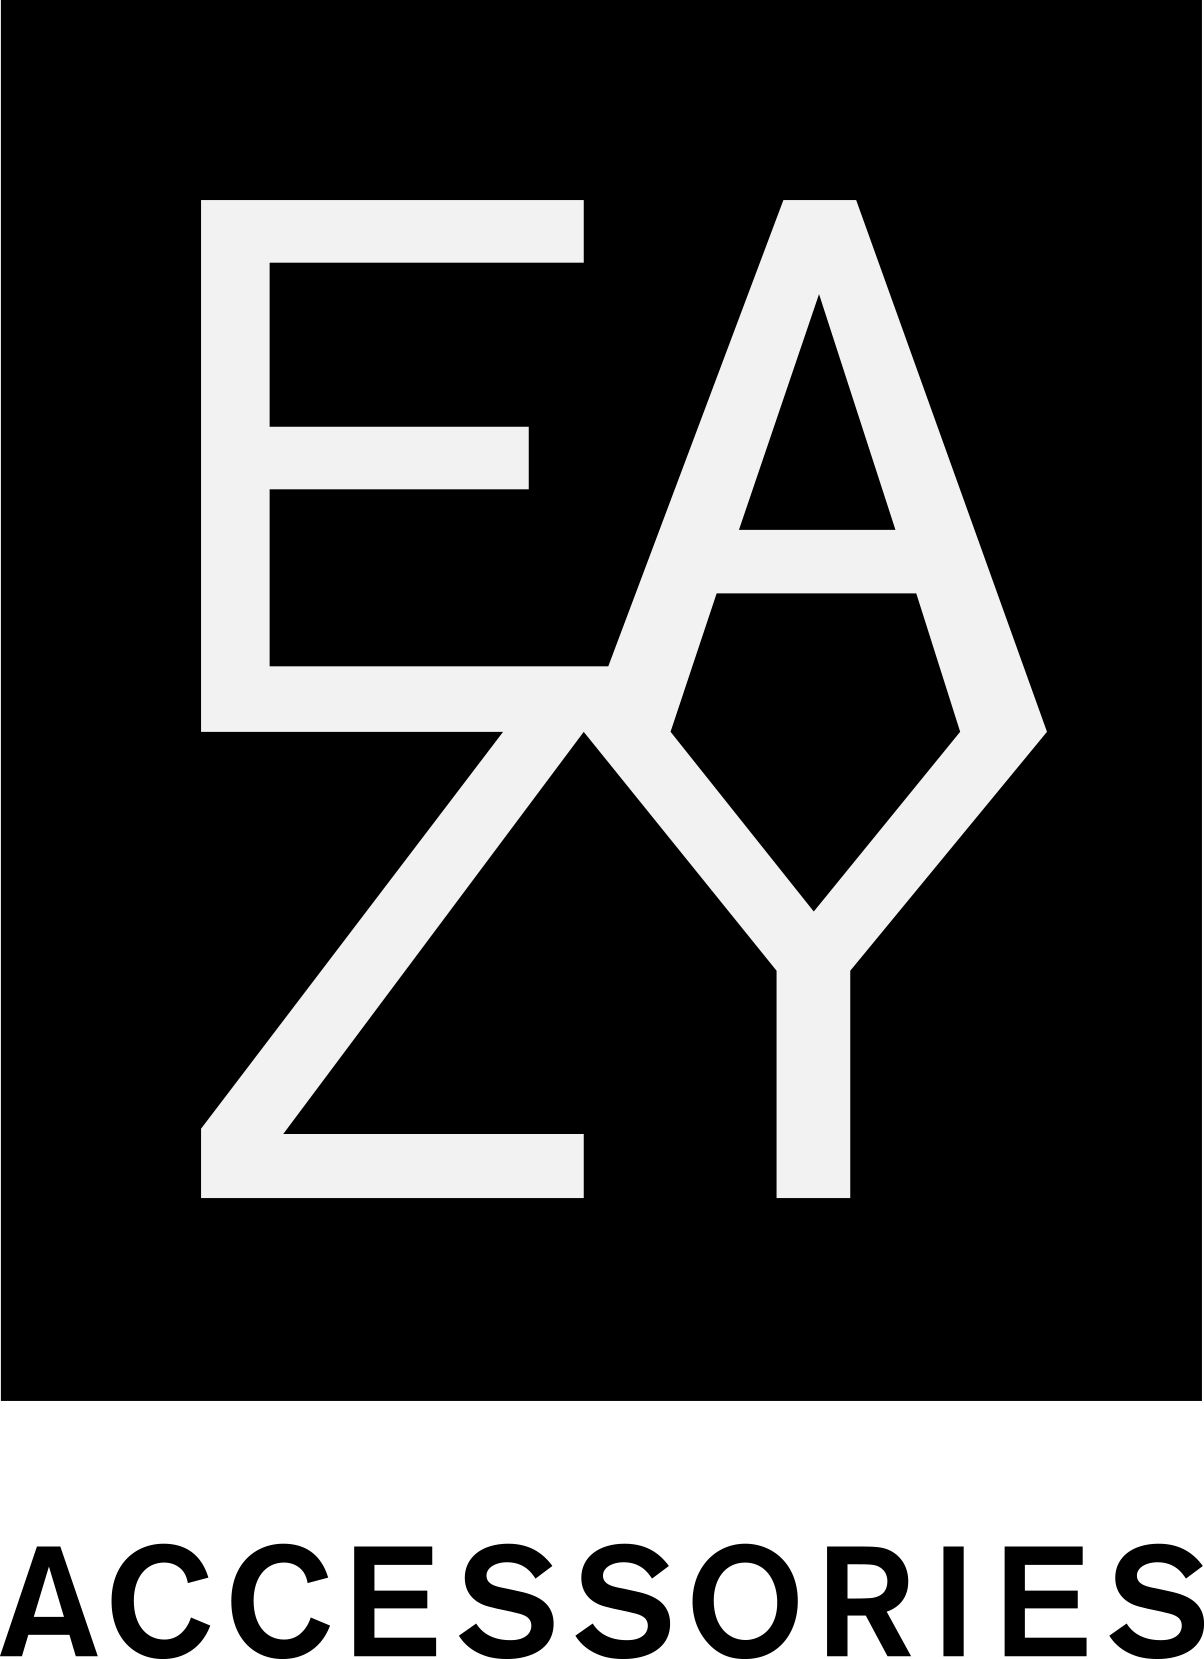 EAZY Accessories